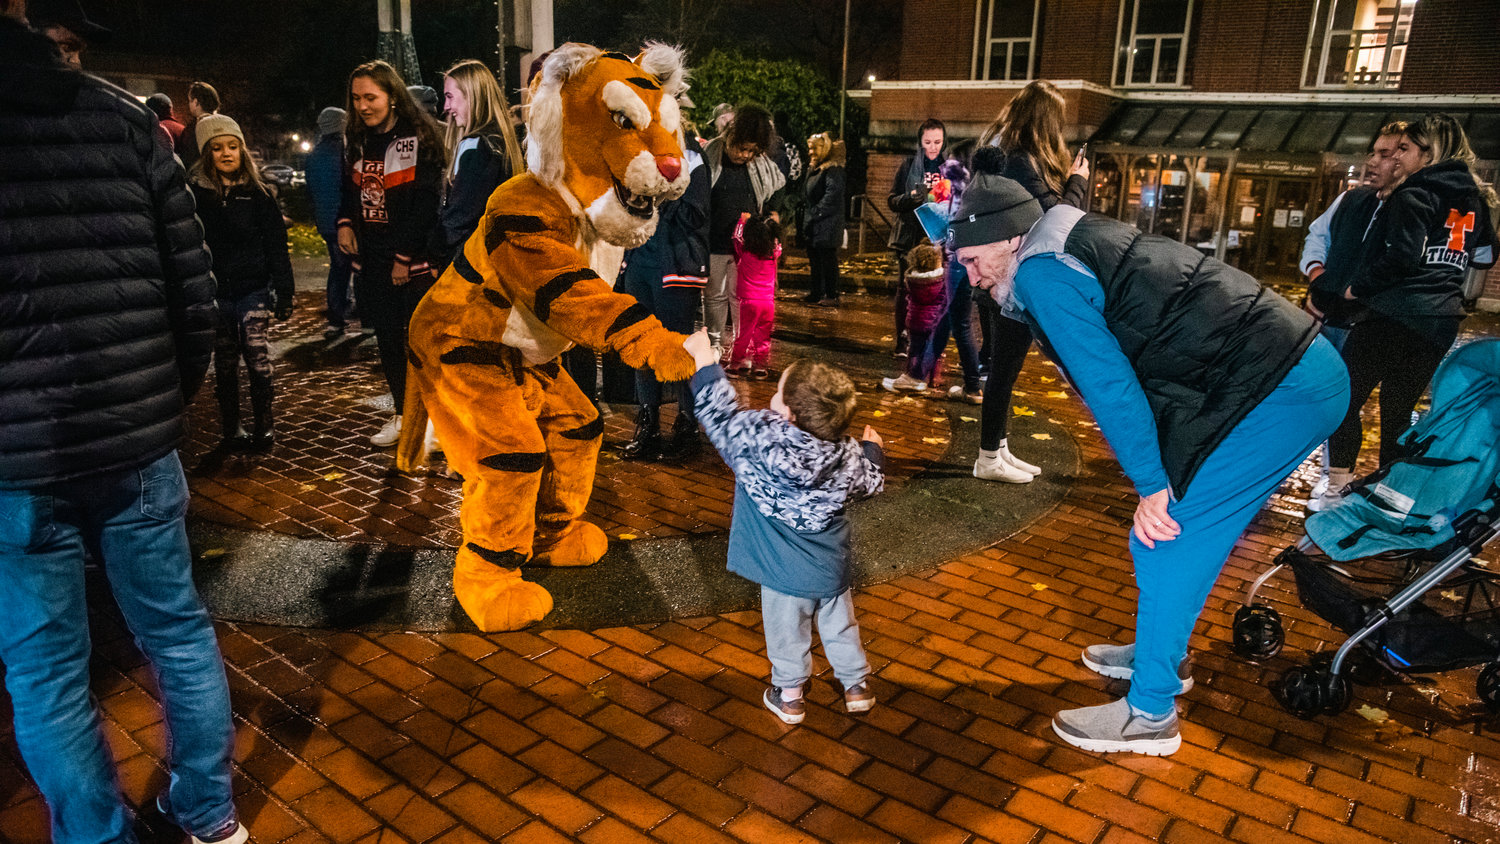 The Centralia High School mascot greets kids in George Washington Park during a Christmas tree lighting ceremony Friday night.